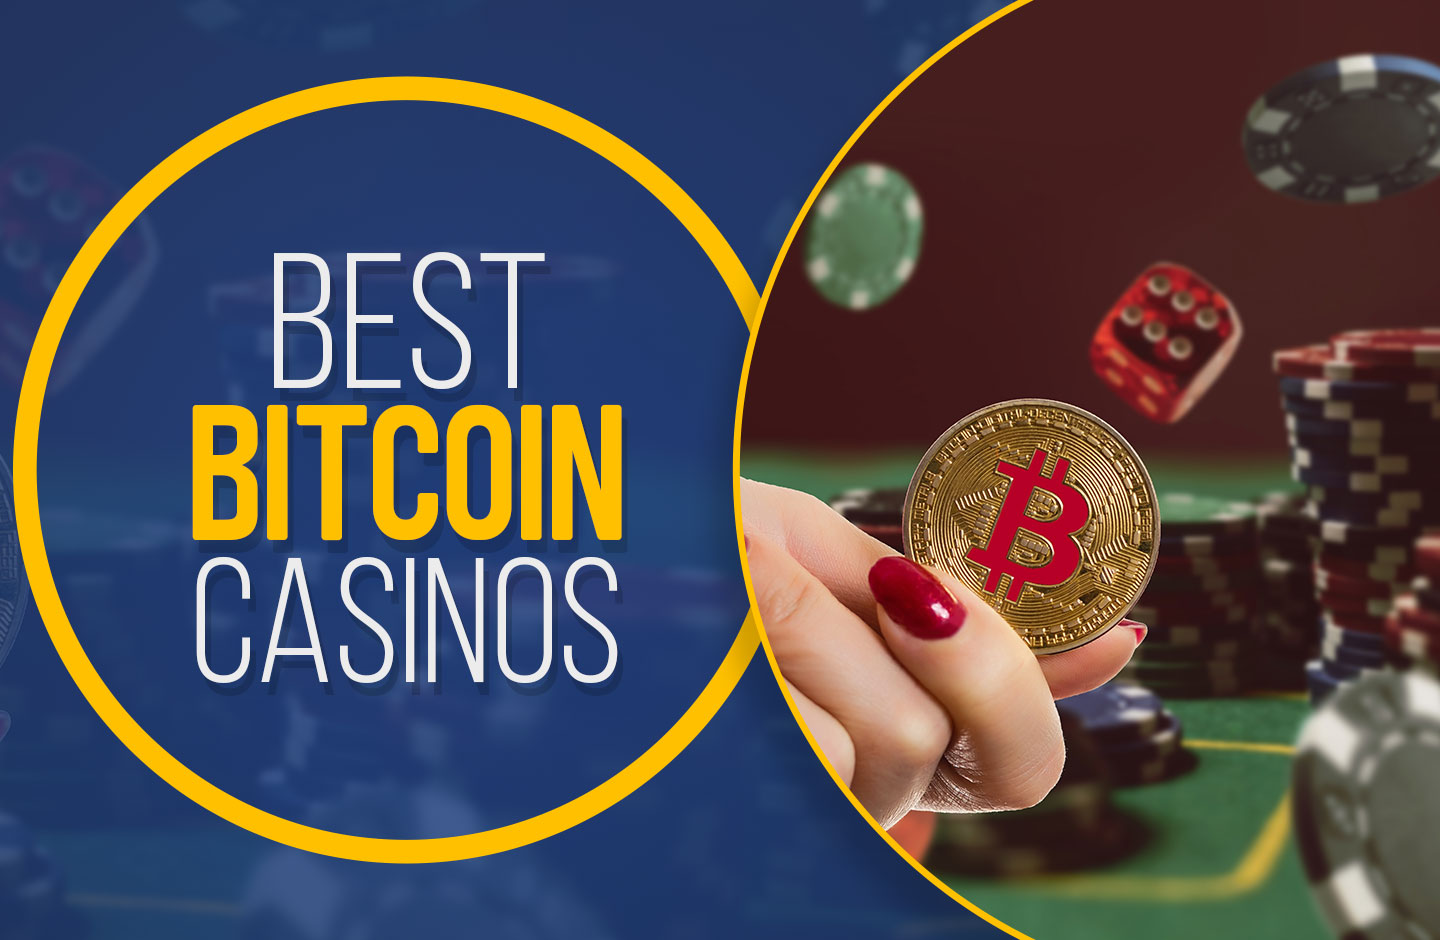 3 Mistakes In crypto casino guides That Make You Look Dumb